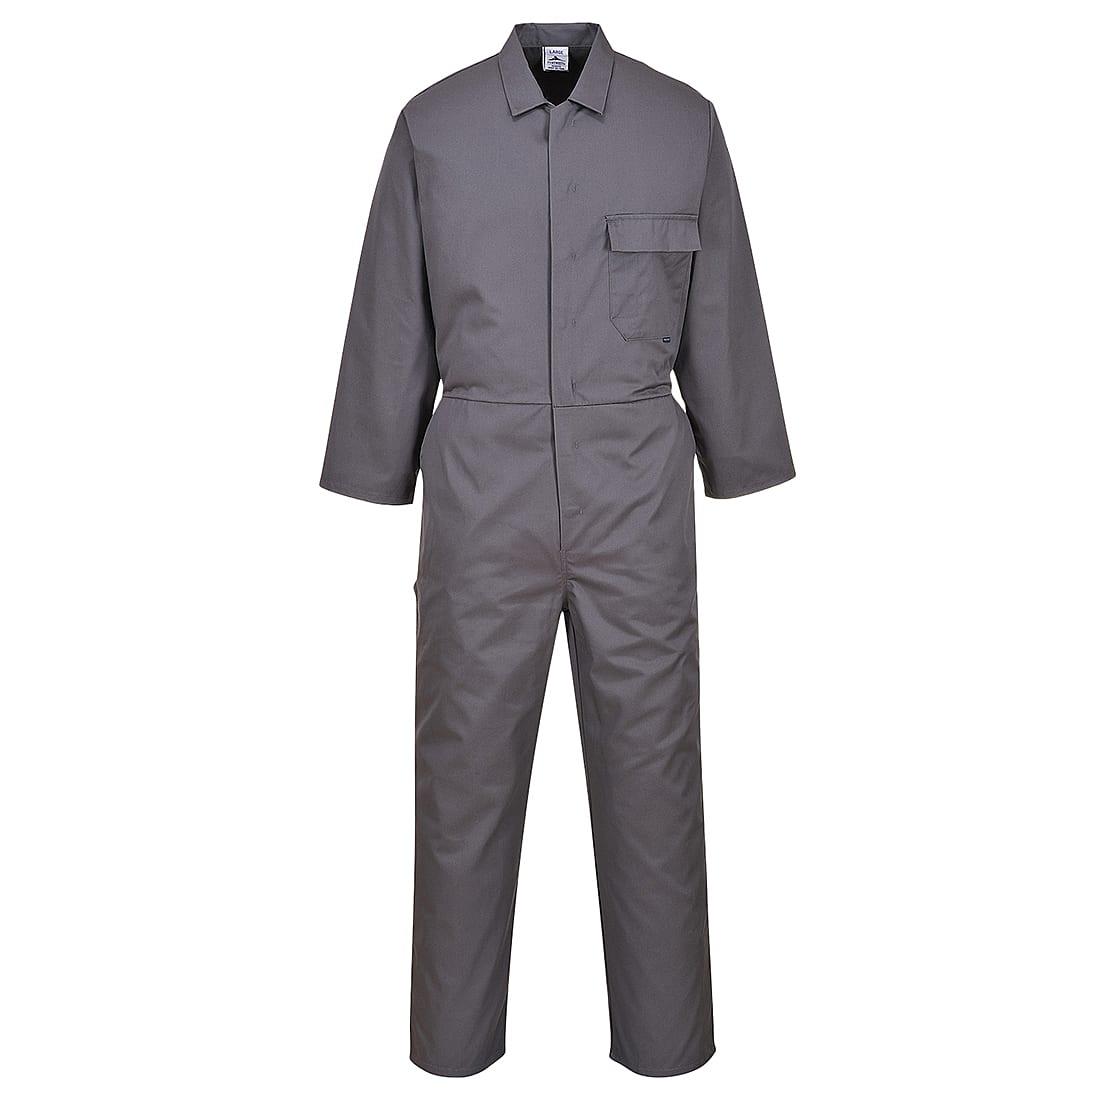 Portwest C802 Standard Coverall in Graphite (Product Code: C802)